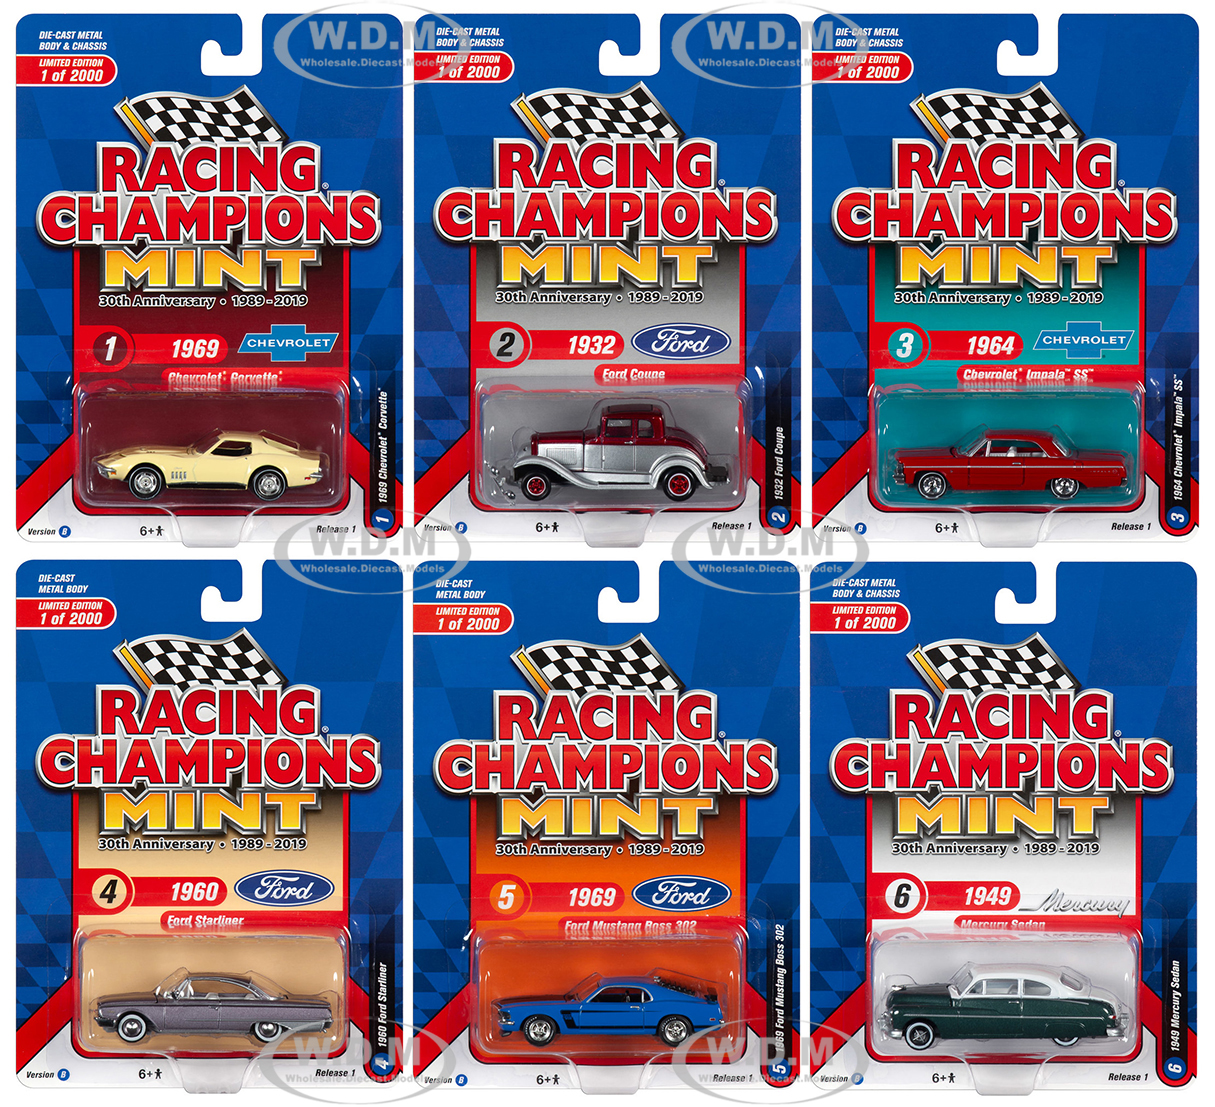 2019 Mint Release 1 Set B of 6 Cars 30th Anniversary (1989-2019) Limited Edition to 2000 pieces Worldwide 1/64 Diecast Models by Racing Champions